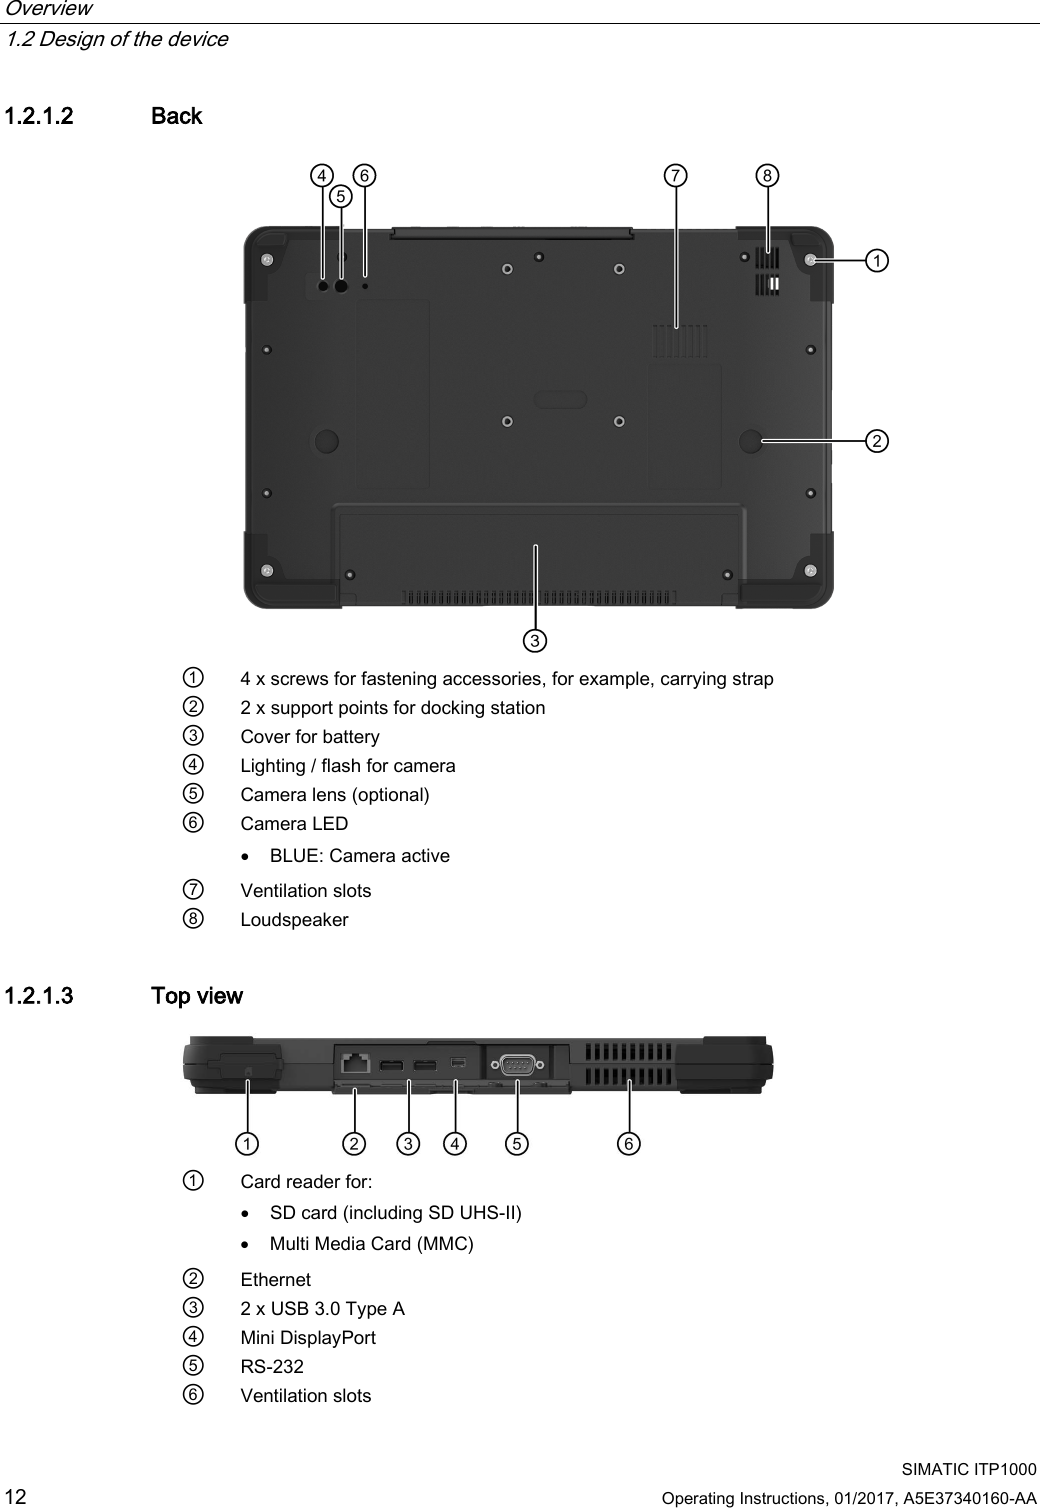 Overview   1.2 Design of the device   SIMATIC ITP1000 12  Operating Instructions, 01/2017, A5E37340160-AA  1.2.1.2 Back  ① 4 x screws for fastening accessories, for example, carrying strap ② 2 x support points for docking station ③ Cover for battery ④ Lighting / flash for camera ⑤ Camera lens (optional) ⑥ Camera LED • BLUE: Camera active ⑦ Ventilation slots ⑧ Loudspeaker 1.2.1.3 Top view  ① Card reader for: • SD card (including SD UHS-II) • Multi Media Card (MMC) ② Ethernet ③ 2 x USB 3.0 Type A ④ Mini DisplayPort ⑤ RS-232 ⑥ Ventilation slots 